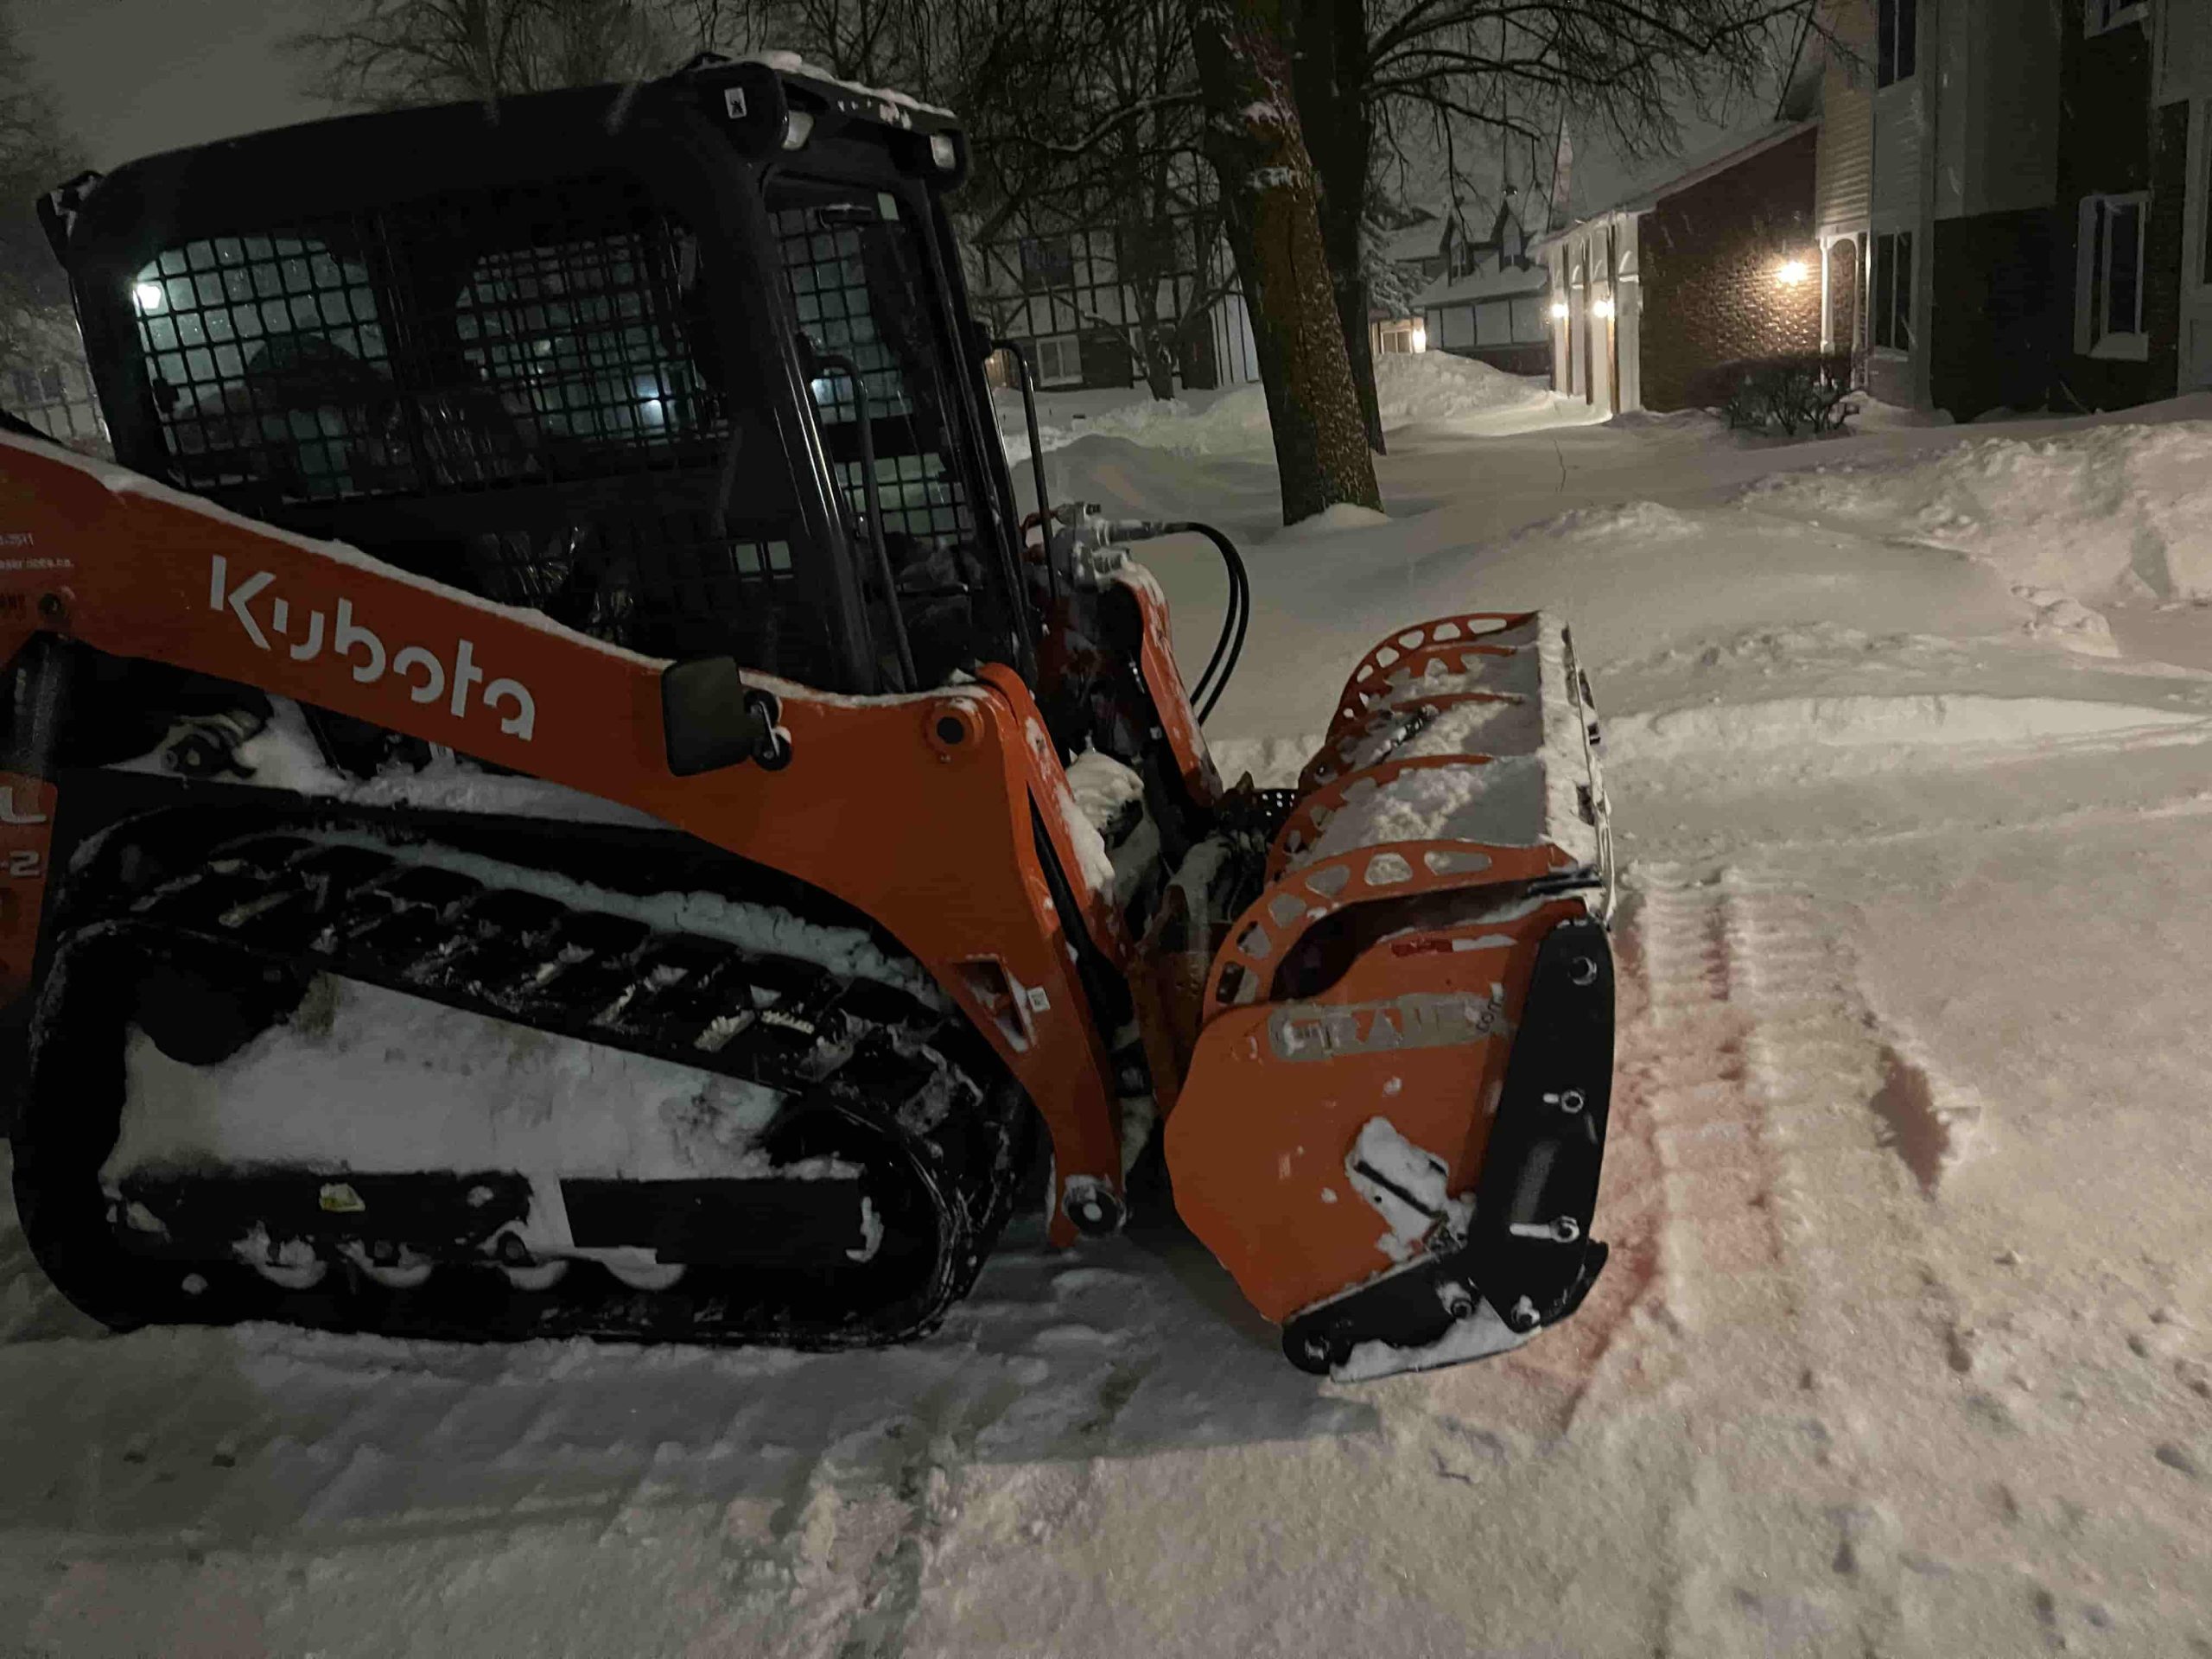 A vibrant orange Kubota skid steer loader is actively removing snow in a commercial area.